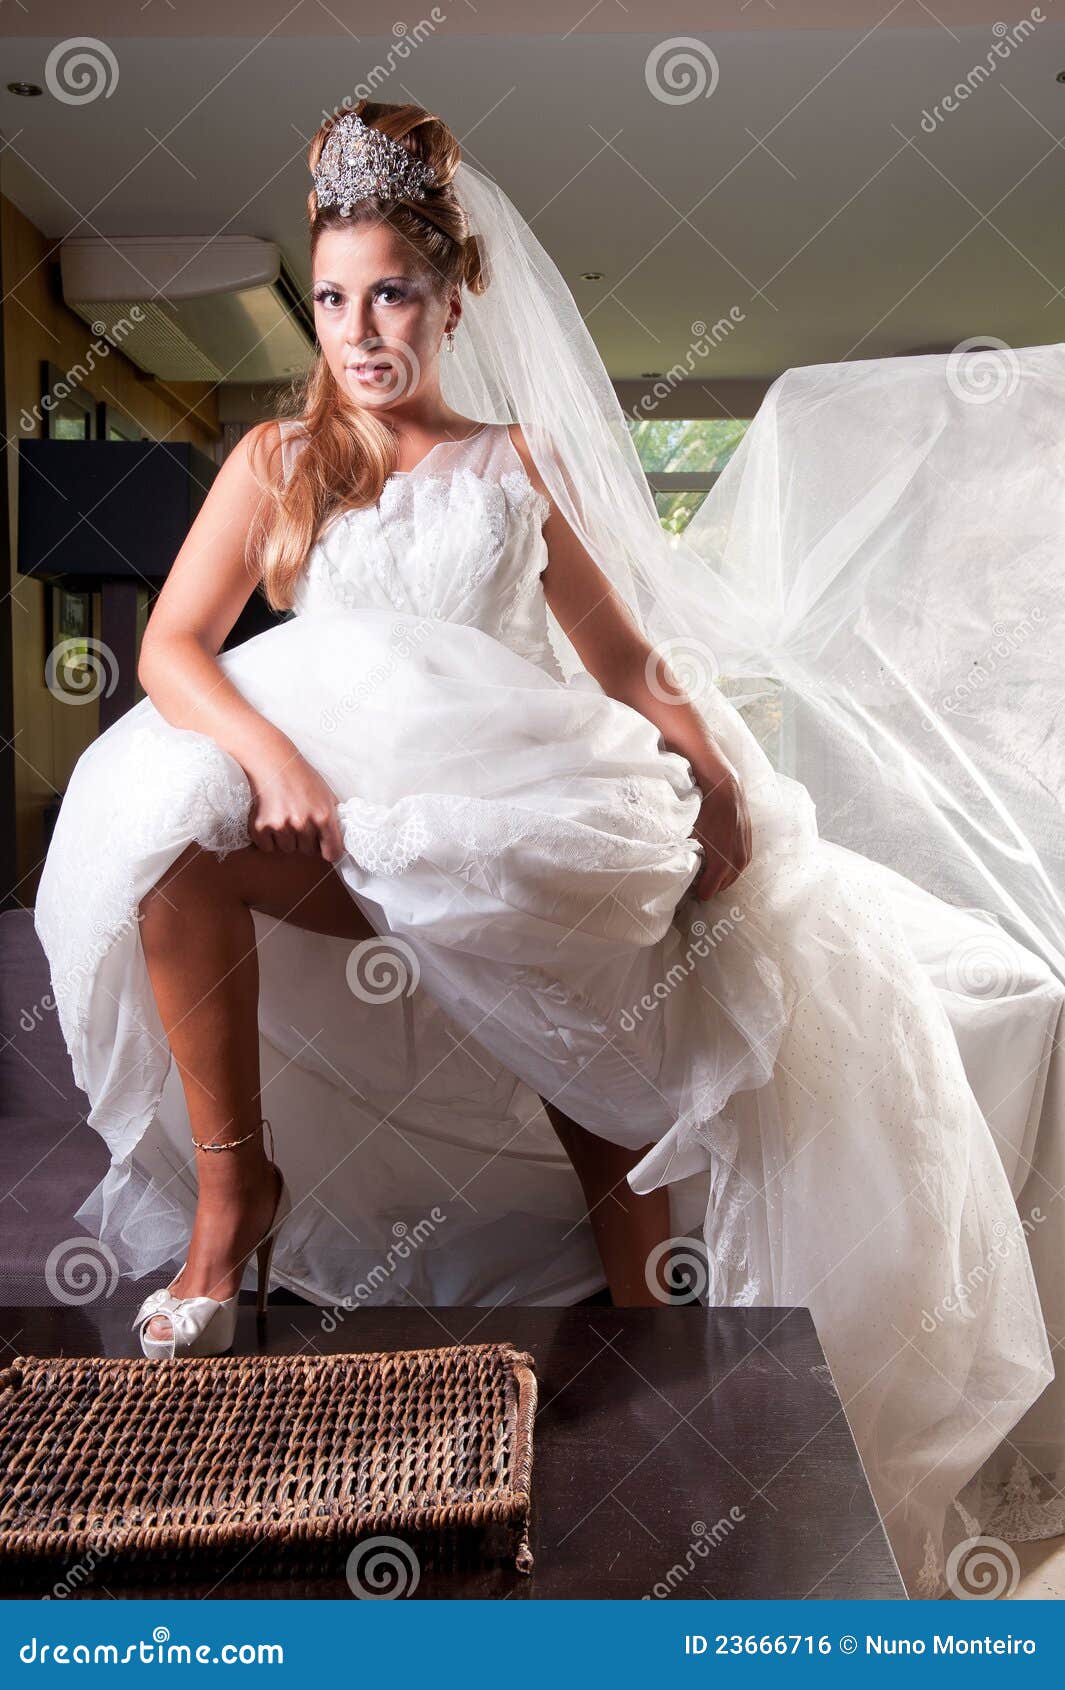 Bride With Big Veil Royalty Free Stock Image - Image: 23666716